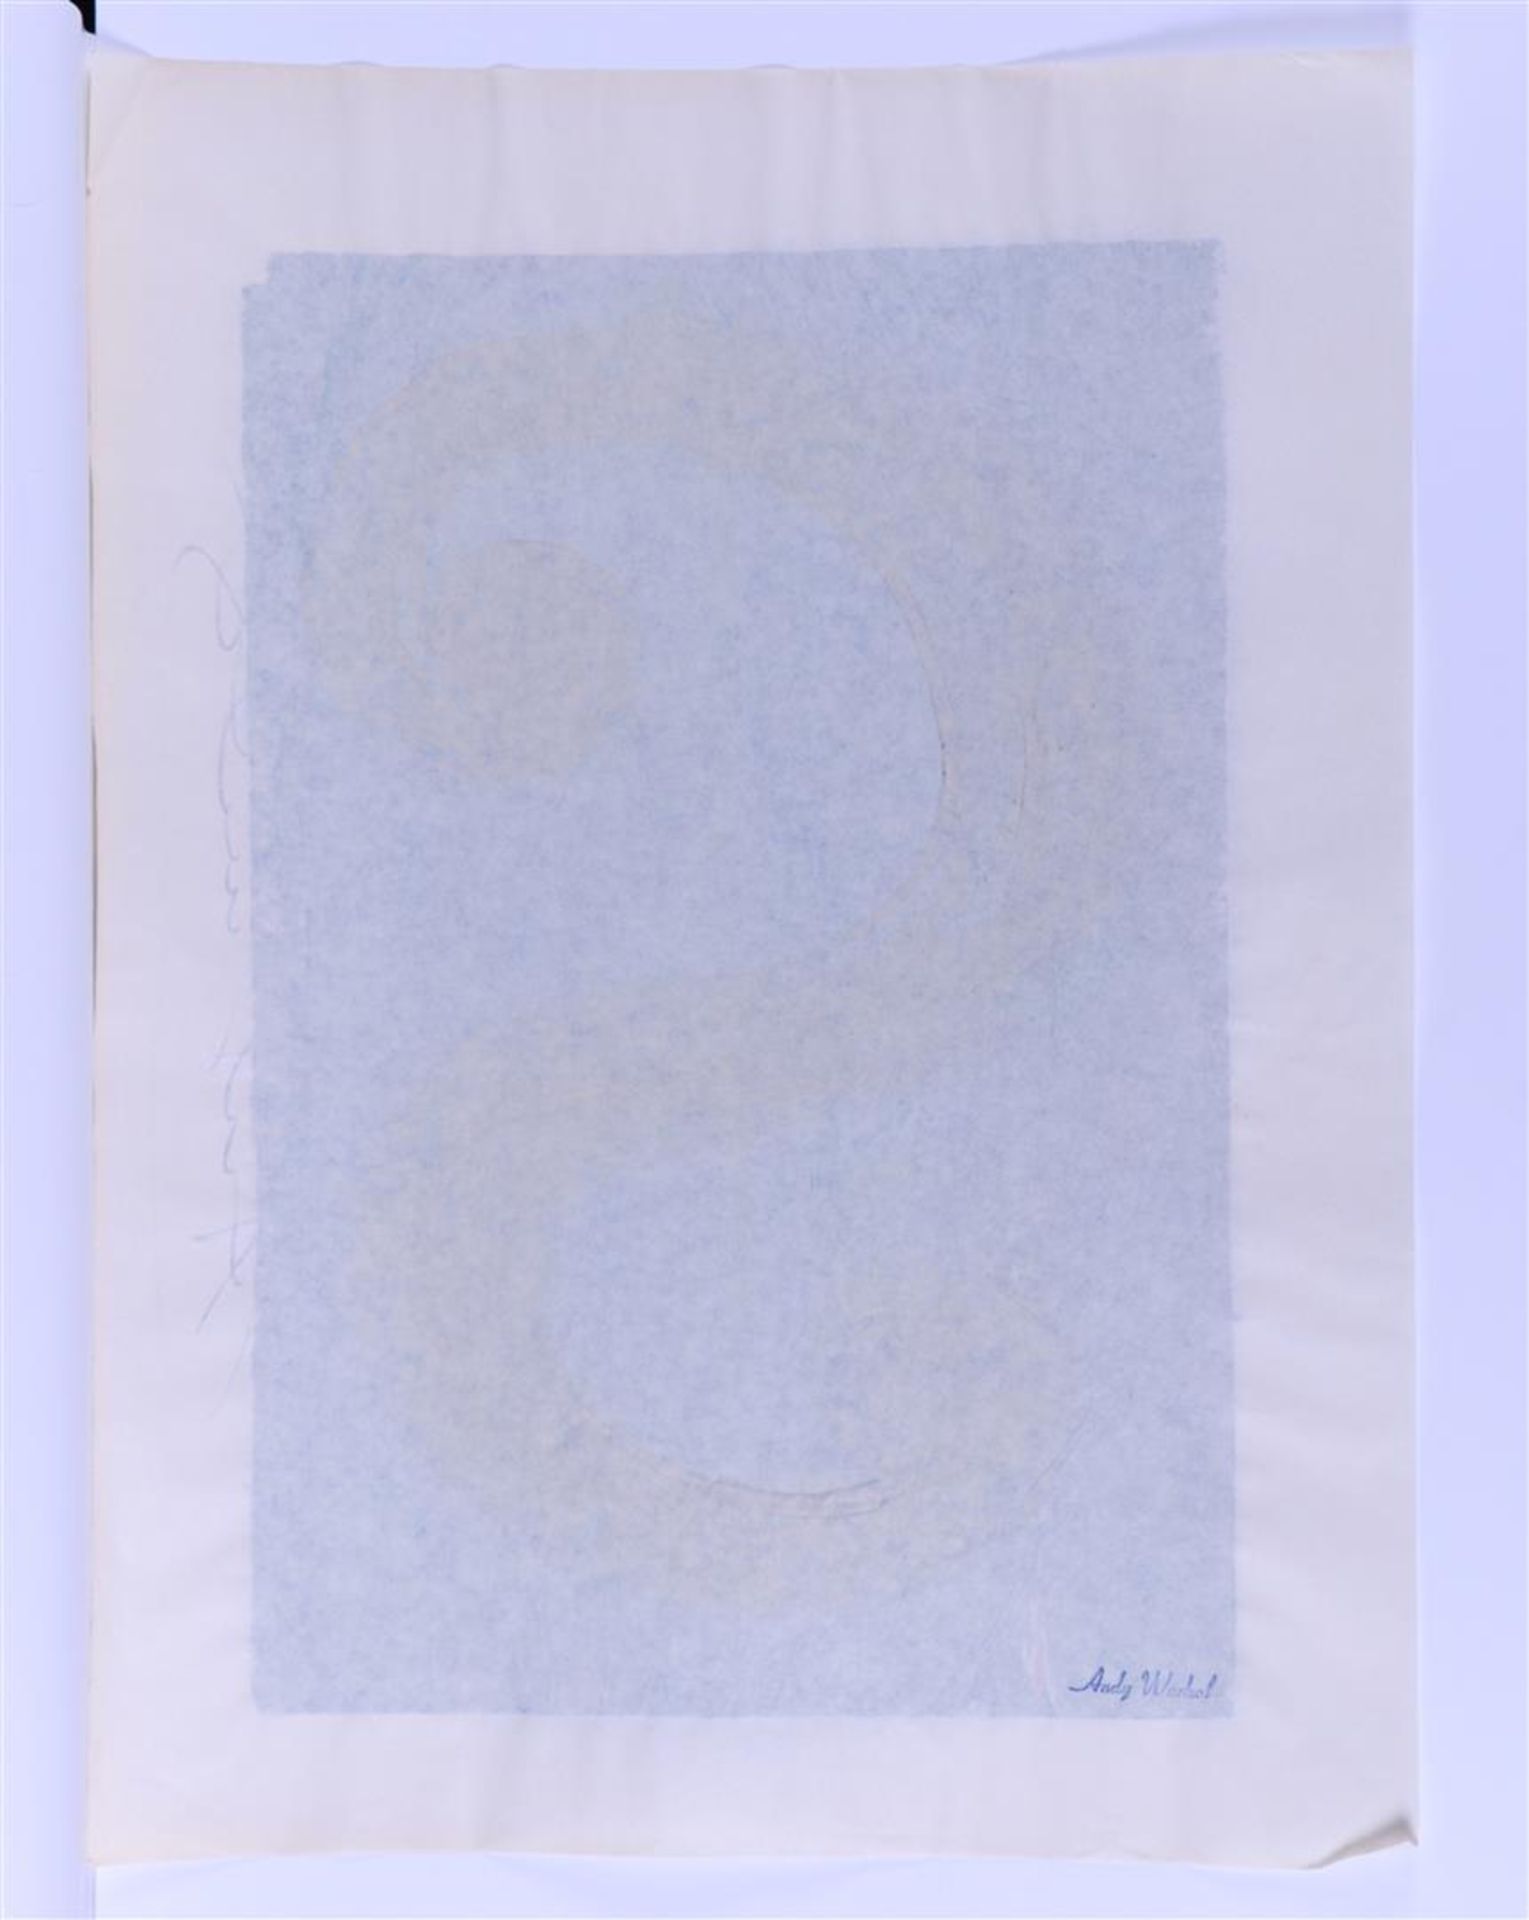 Andy Warhol Pittsburg, Pennsylvania 1928 - 1987 New York) (after), Dollar Sign on blue ground - Image 2 of 3